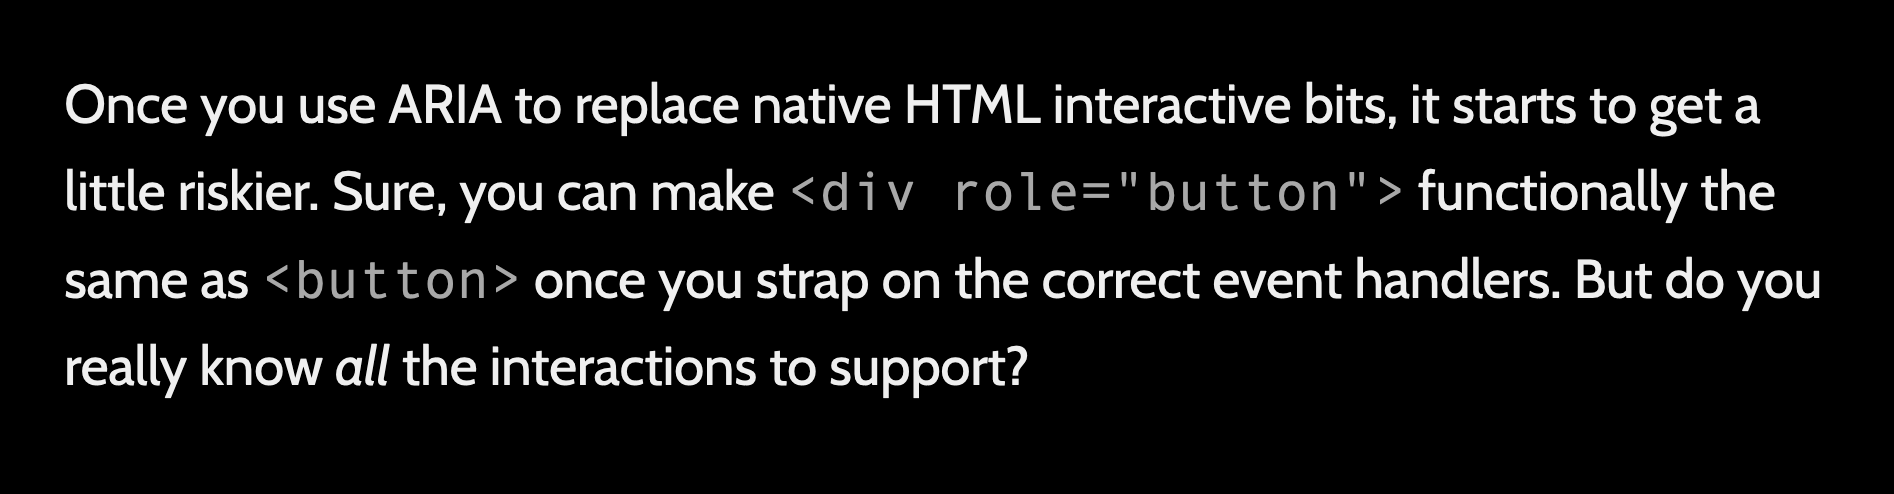 Once you use ARIA to replace native HTML interactive bits, it starts to get a little riskier. Sure, you can make 'div role="button"' functionally the same as 'button' once you strap on the correct event handlers. But do you really know all the interactions to support? 